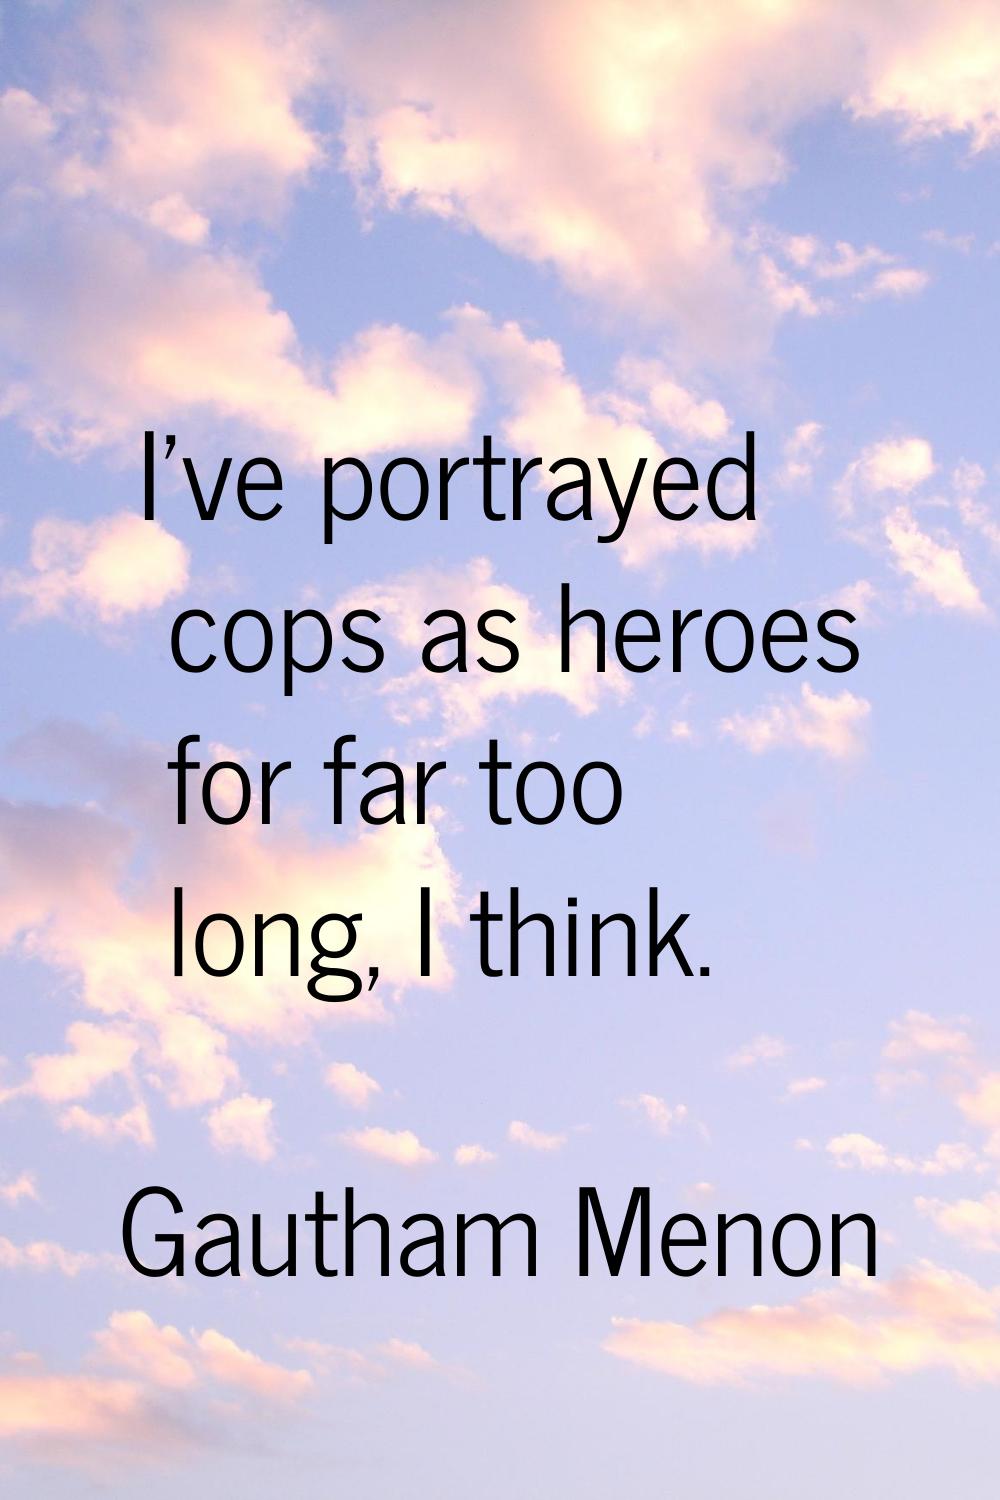 I've portrayed cops as heroes for far too long, I think.